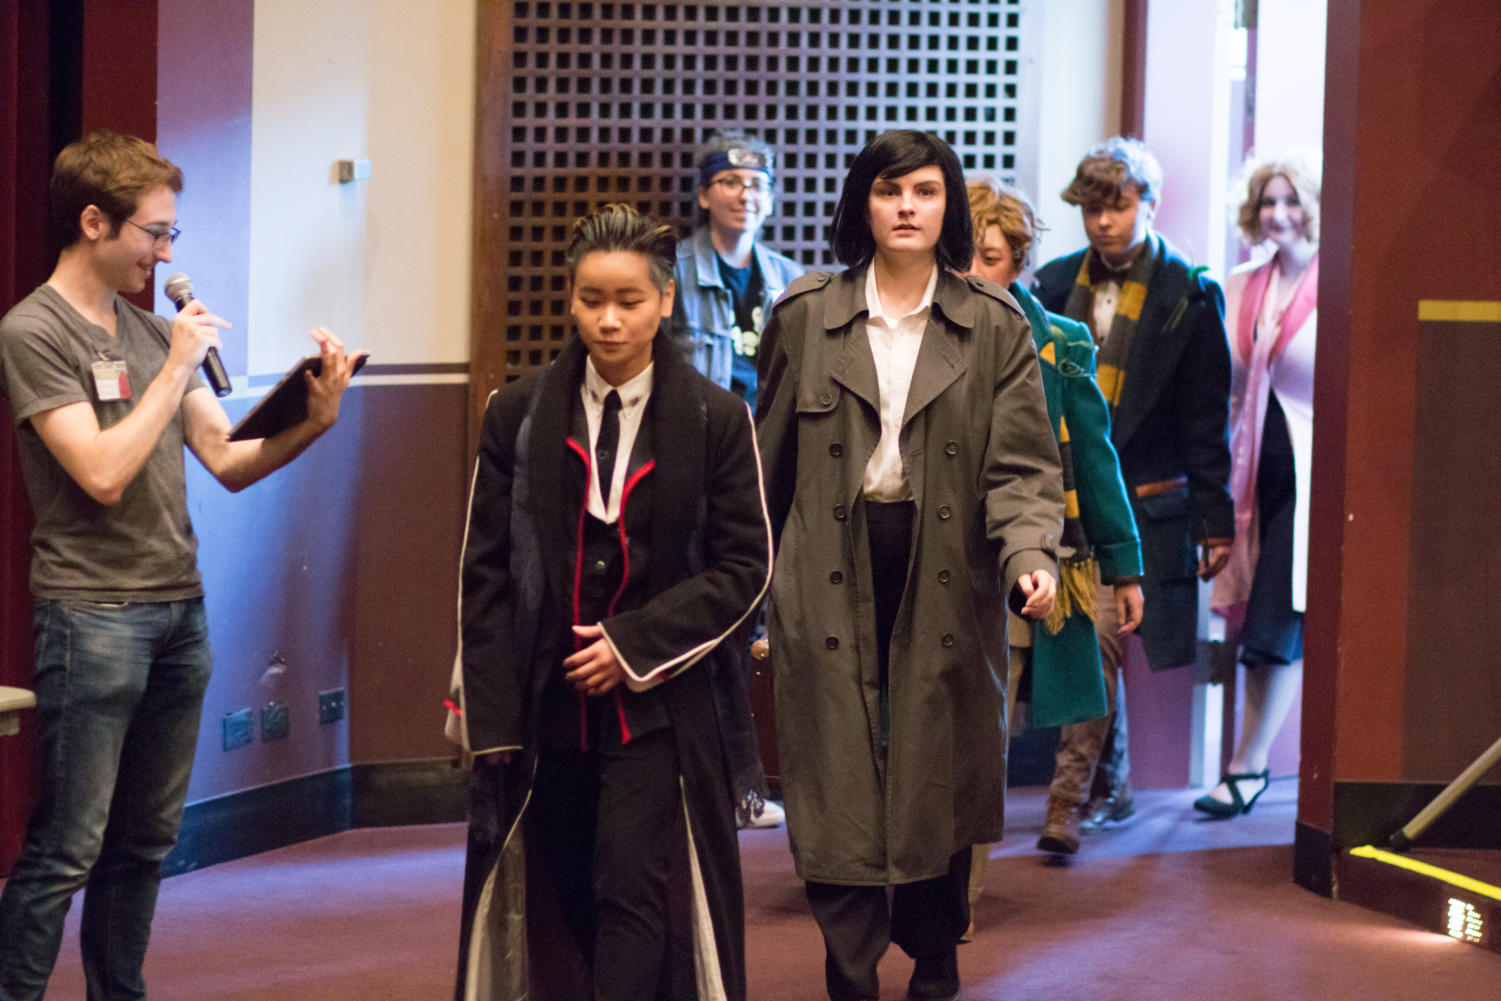 The Fantastic Beasts group cosplay enters the competition hall. They won best group in the cosplay contest.